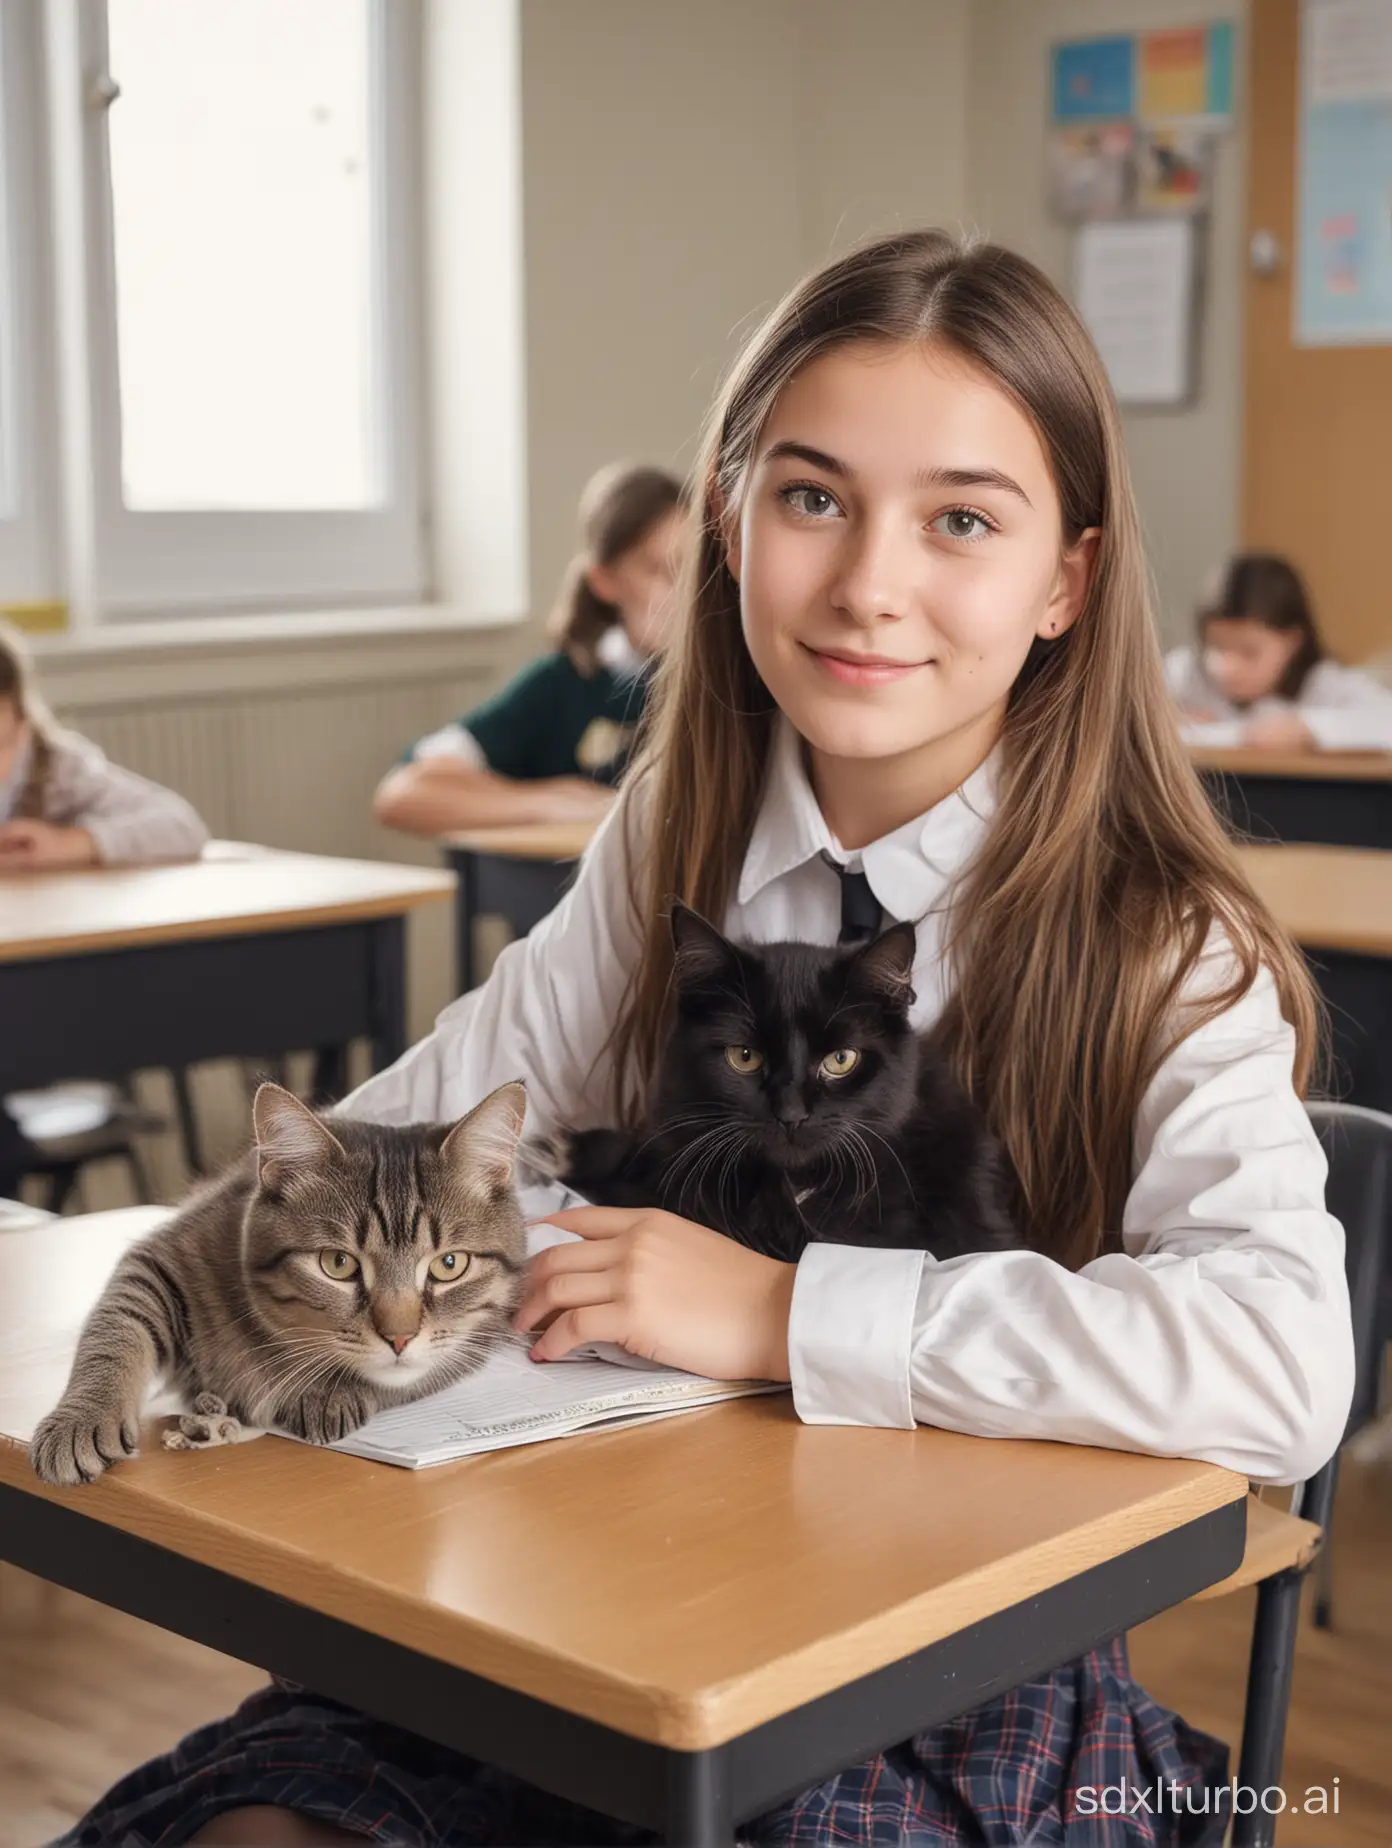 A girl, classroom, with a cat